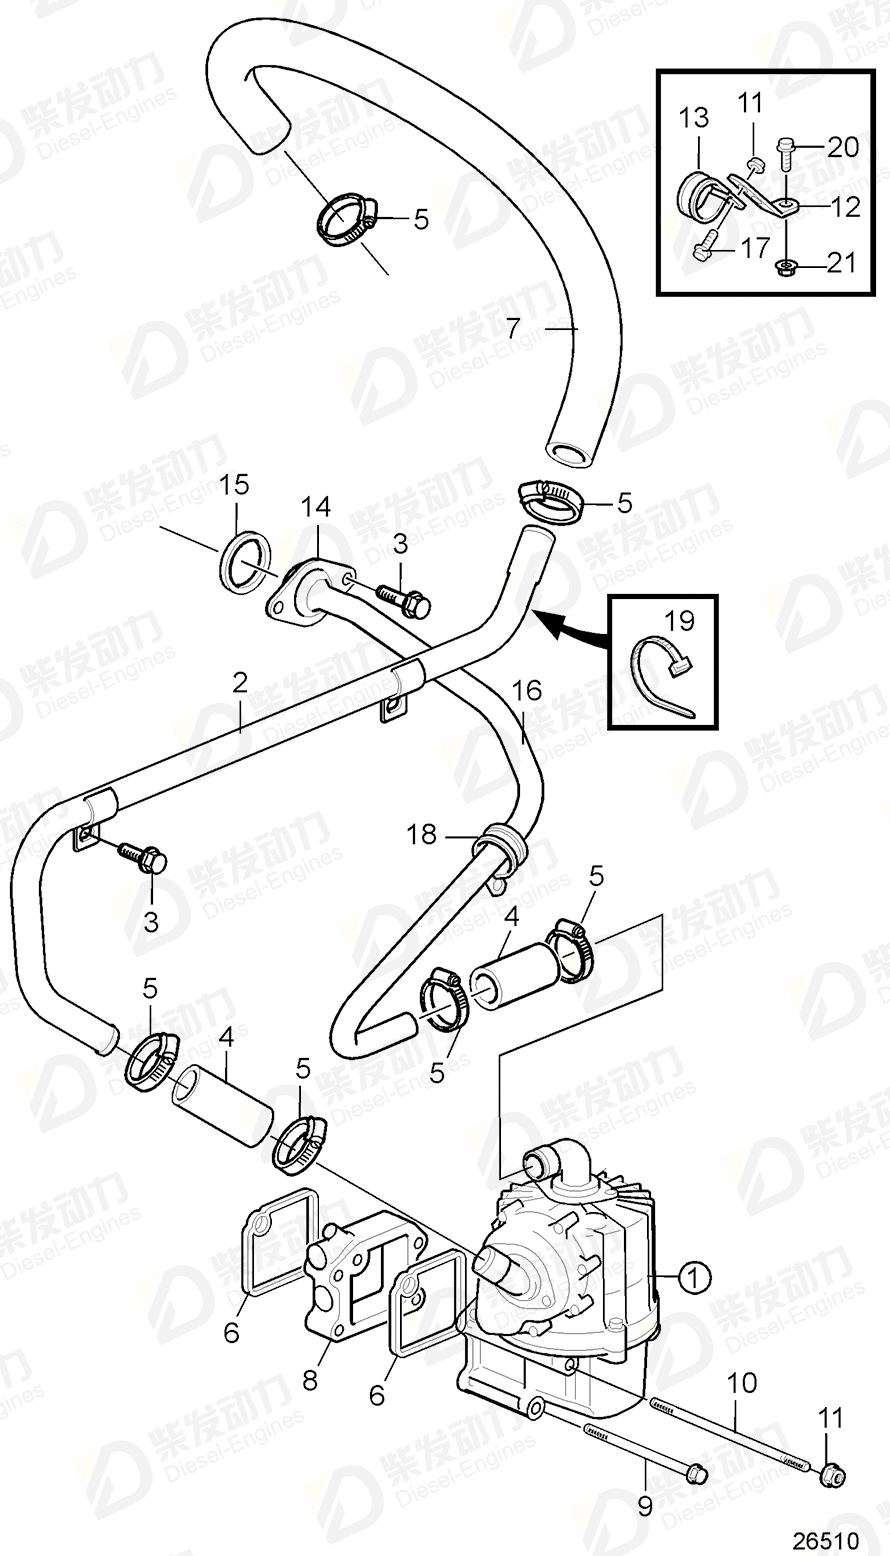 VOLVO Spacer 3883943 Drawing